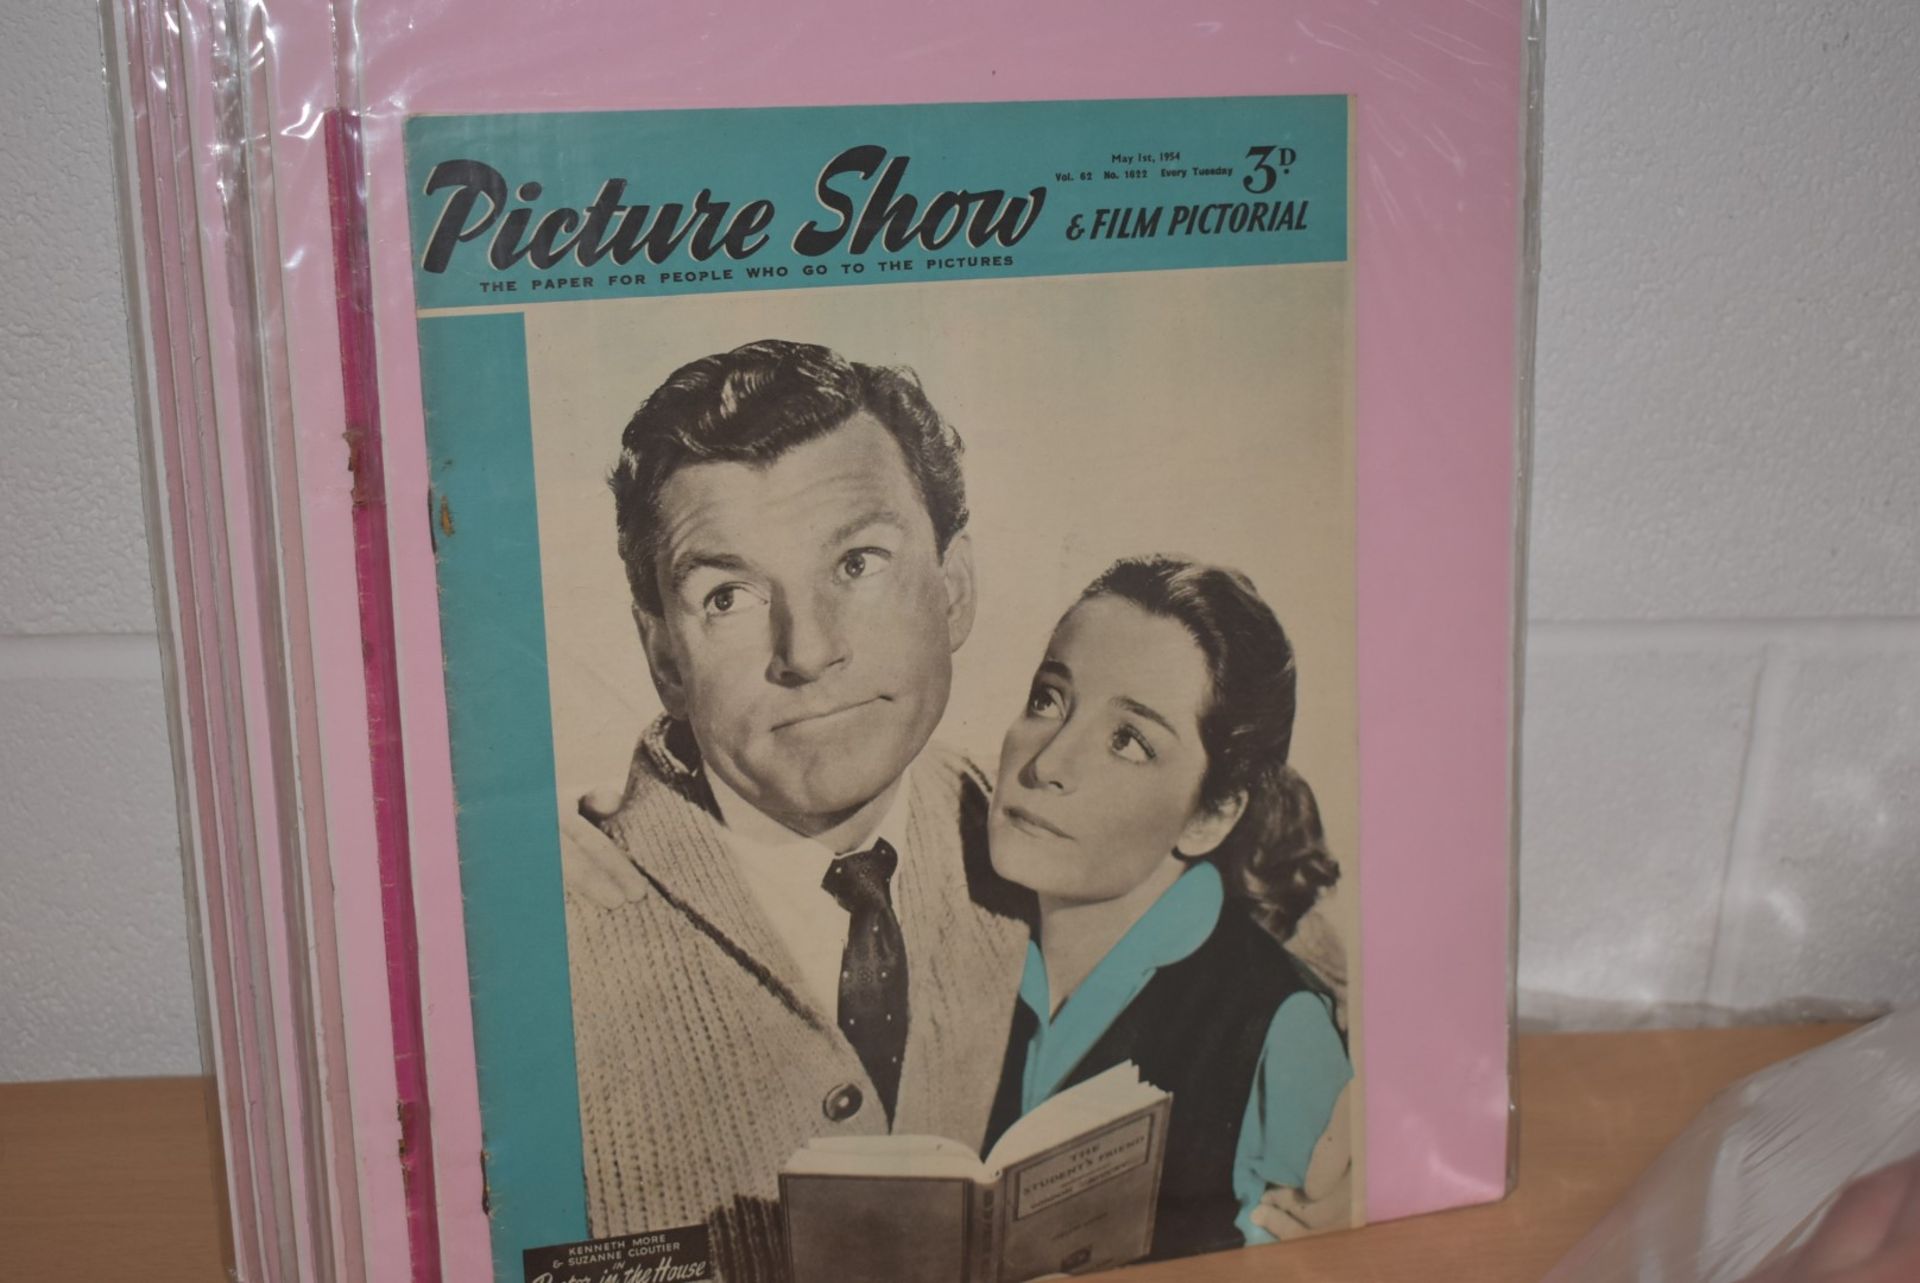 41 x Vintage 1950's Picture Show & Film Pictorial Magazines Dated 1950 to 1958 - Ref MB124 - CL431 - - Image 17 of 18